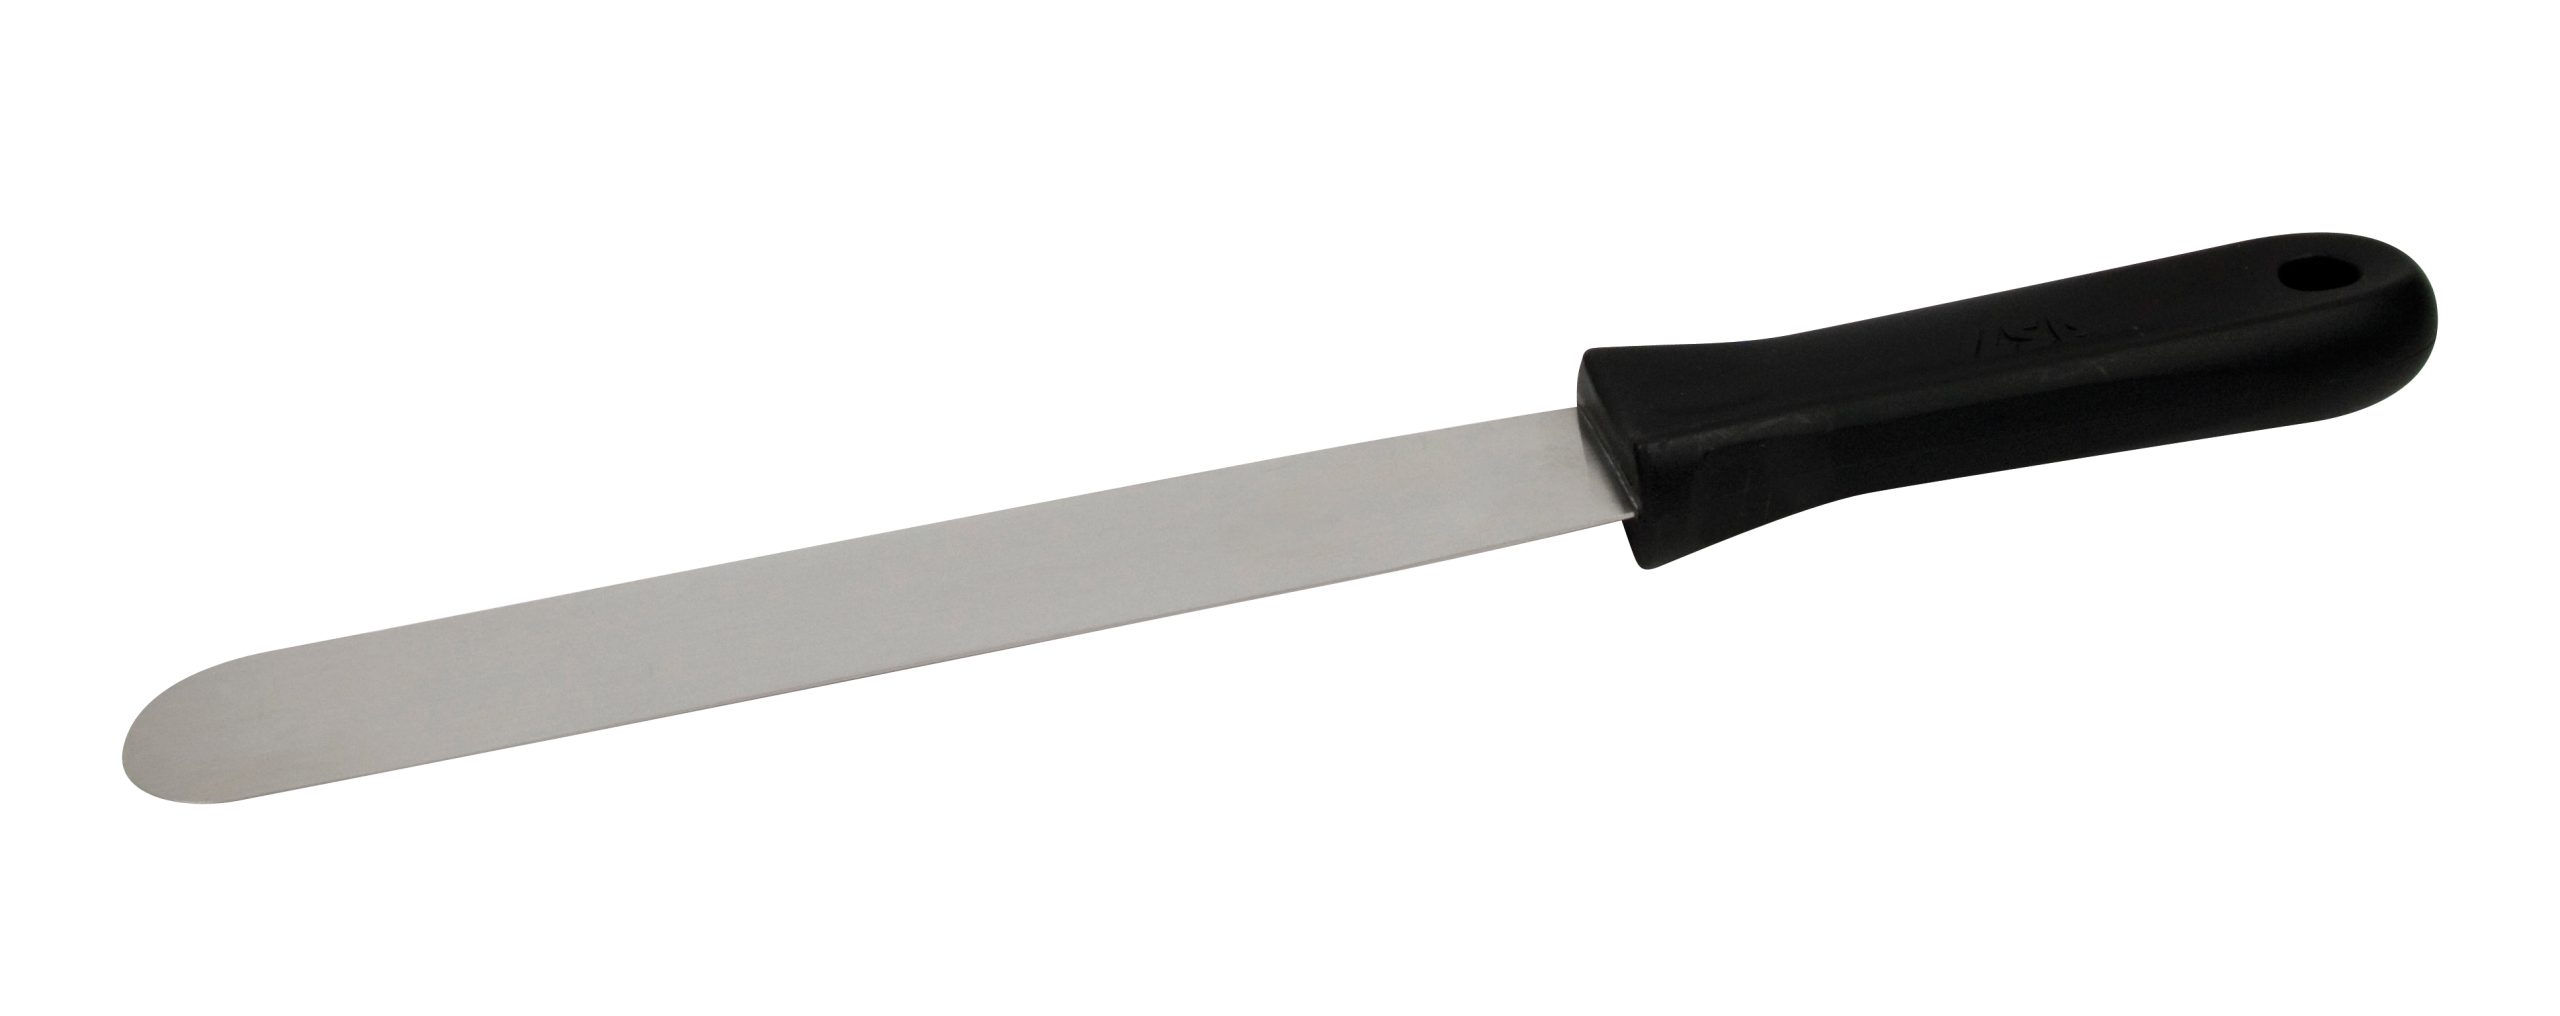 Straight spatula with tapered thickness - Stainless steel 35CM